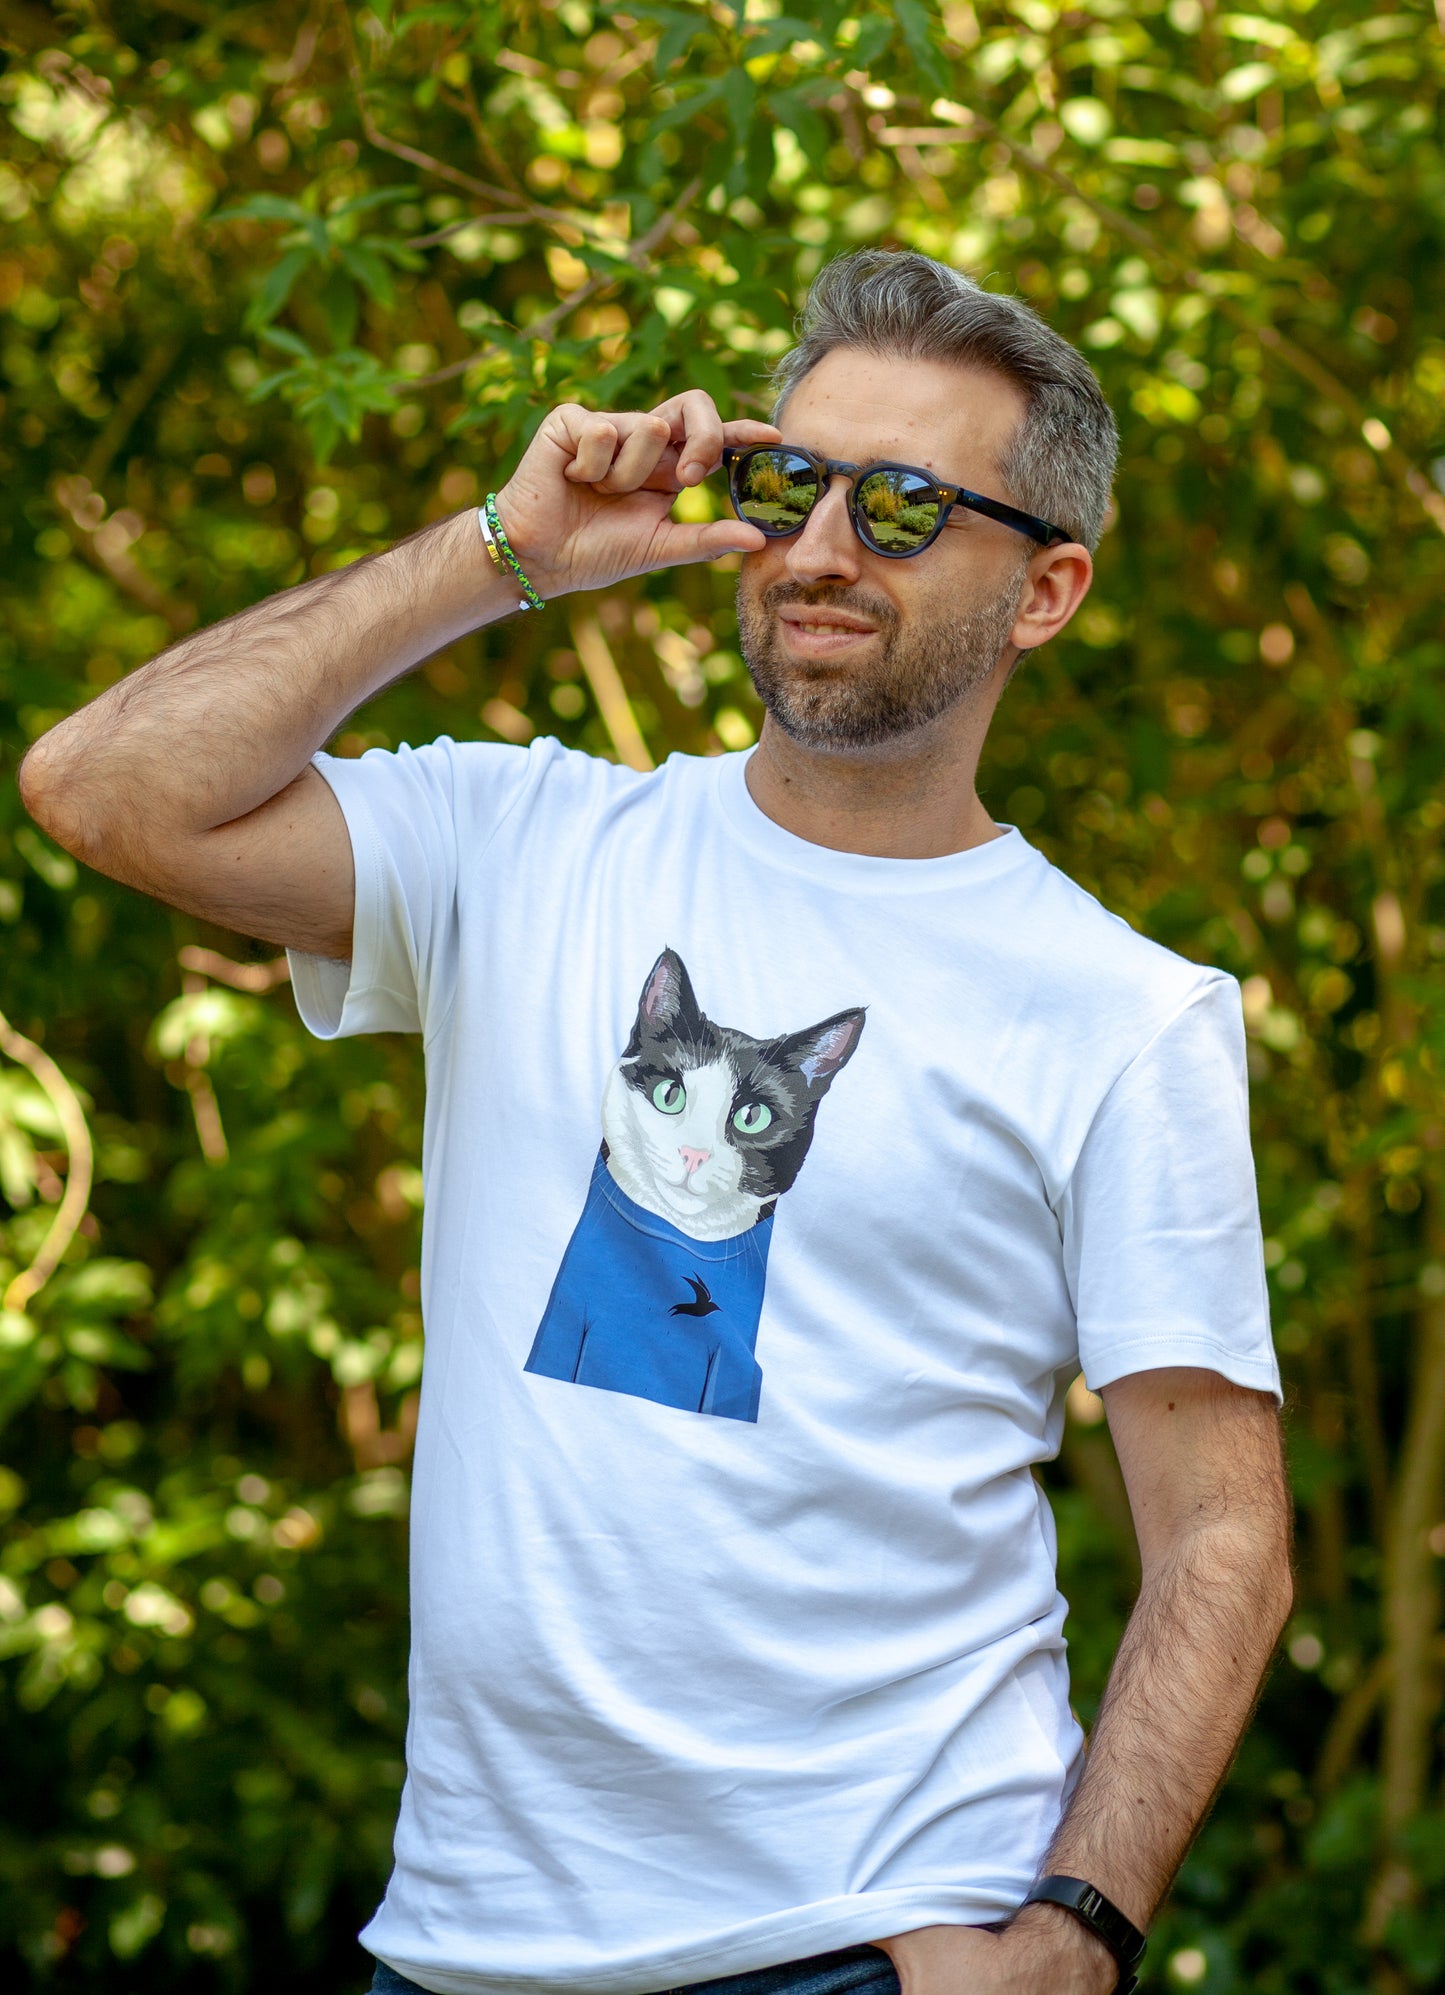 Serenity Cat Pima Cotton T-Shirt: Stylish and Sustainable T-Shirt with Cute Cat Design